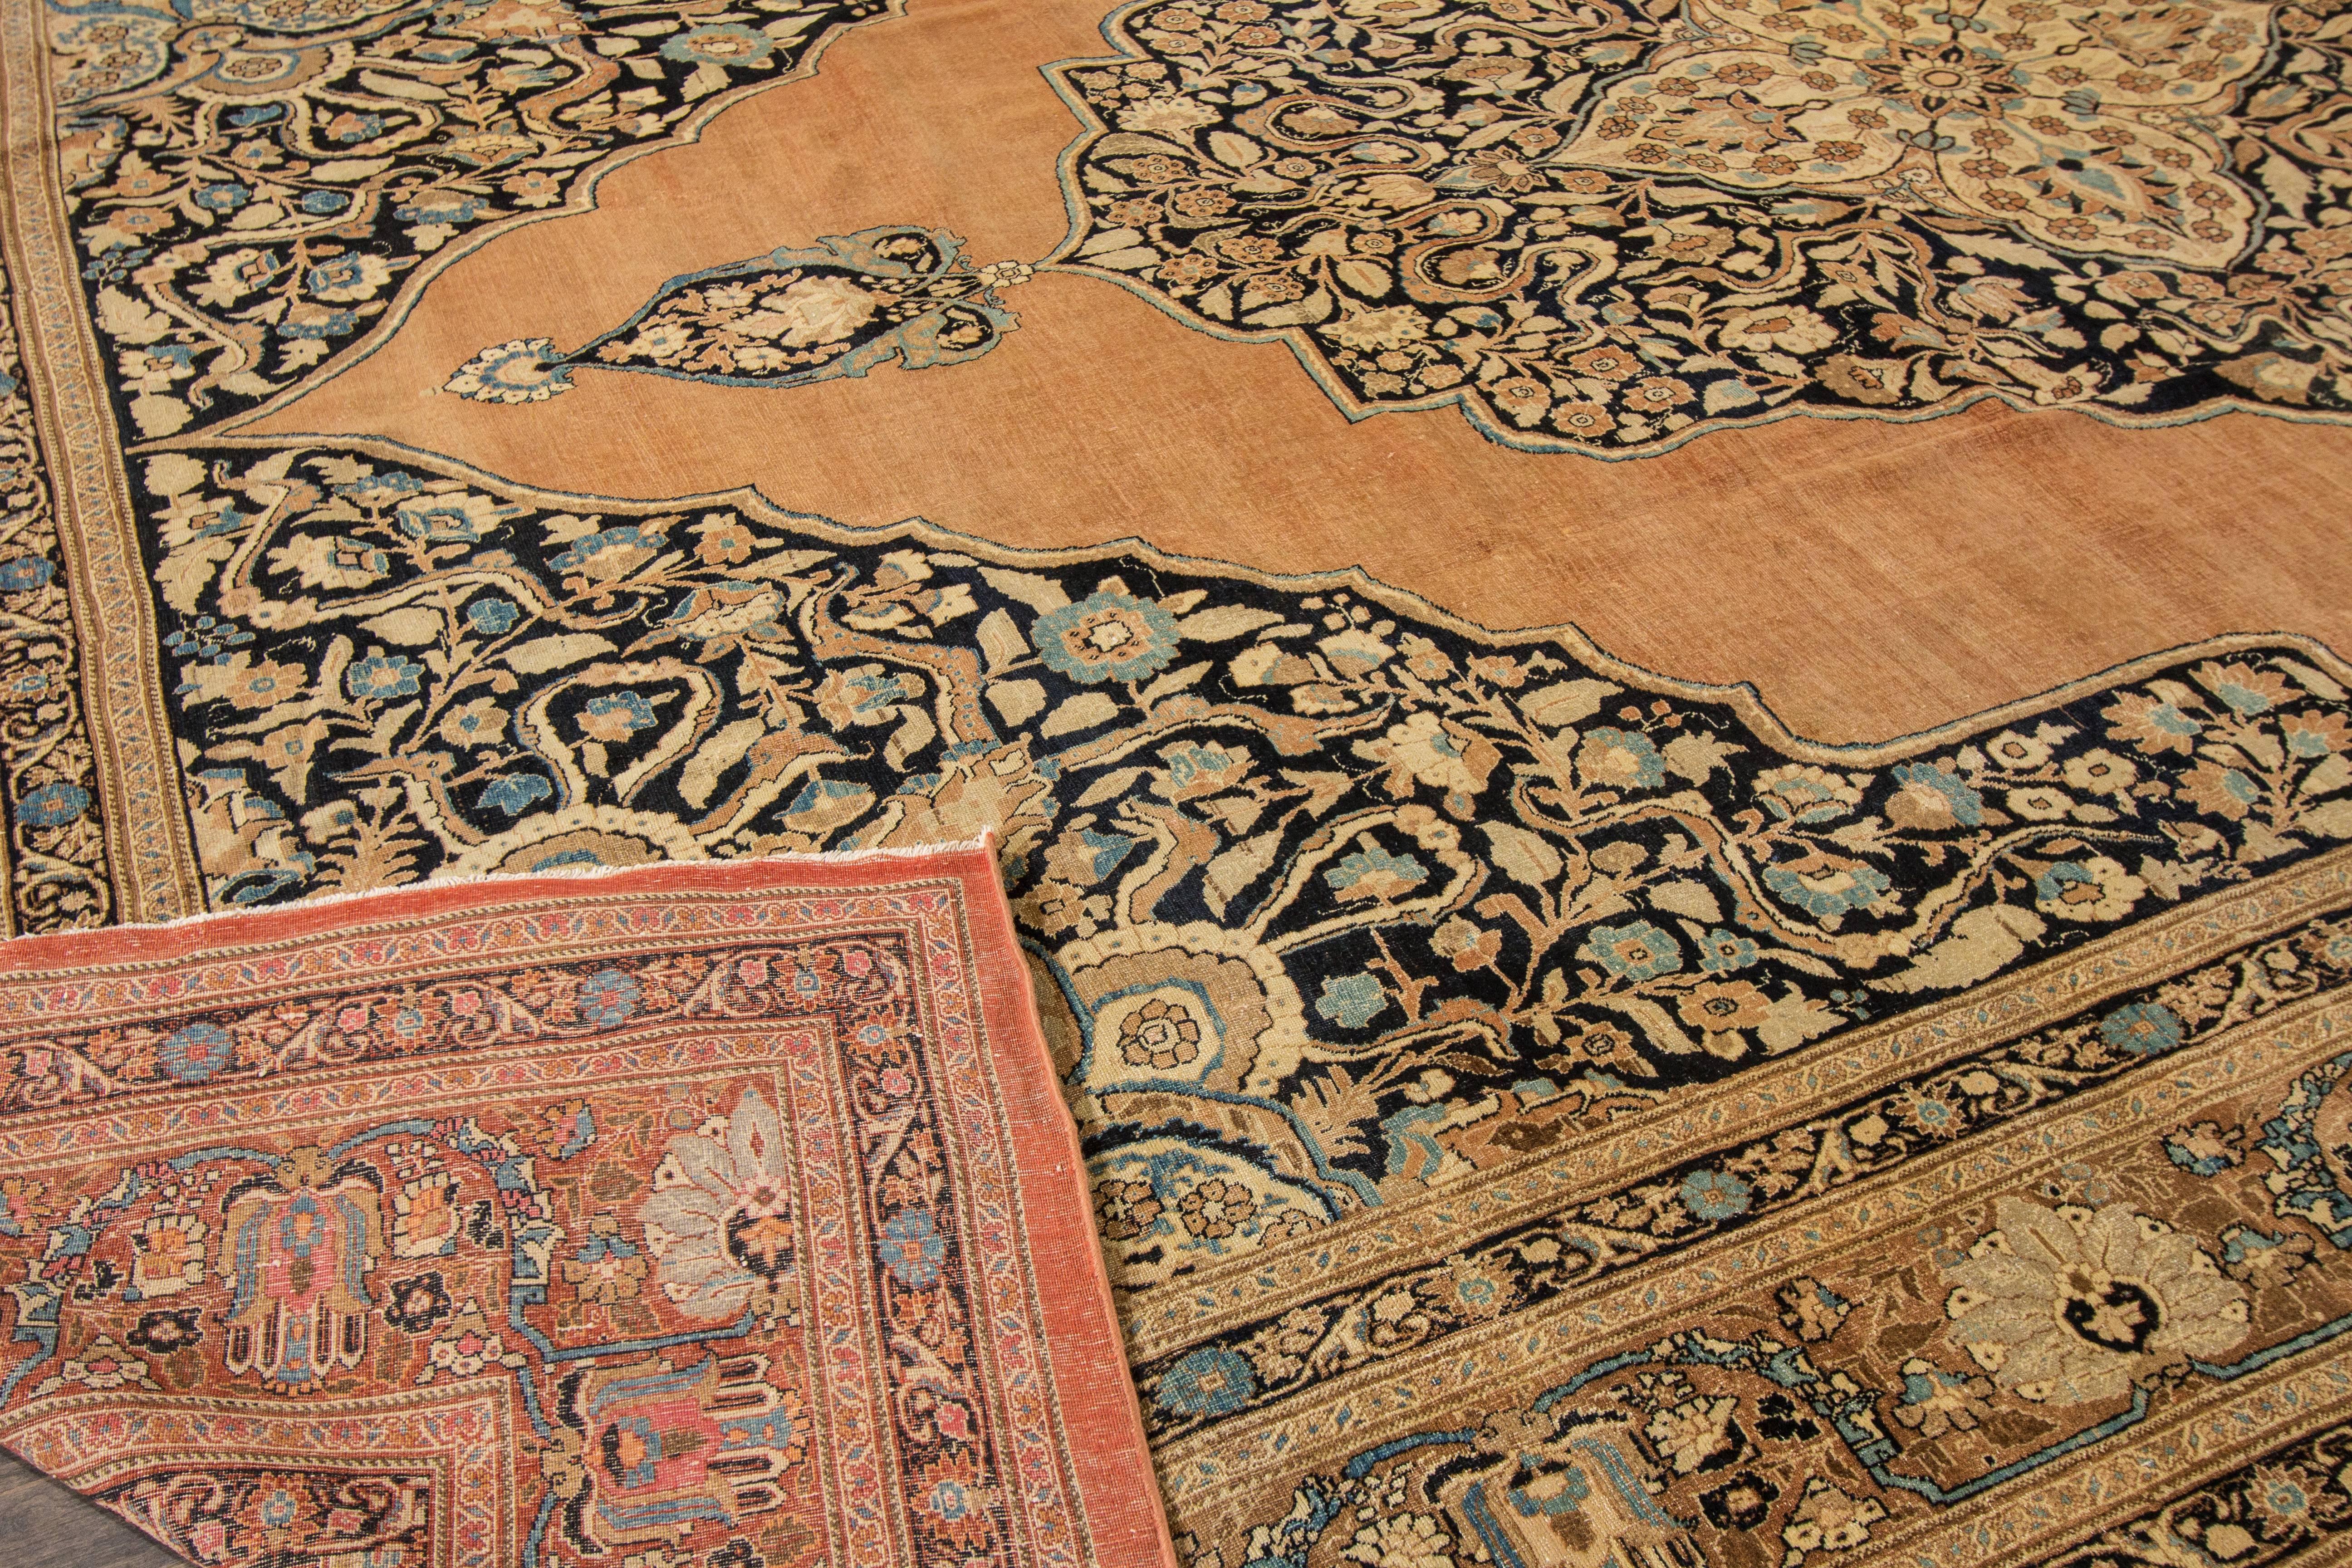 A hand-knotted antique Tabriz rug with a floral medallion design on a beige field. Accents of black, brown and blue throughout the piece. The size of this piece is 11' x 16'.9.